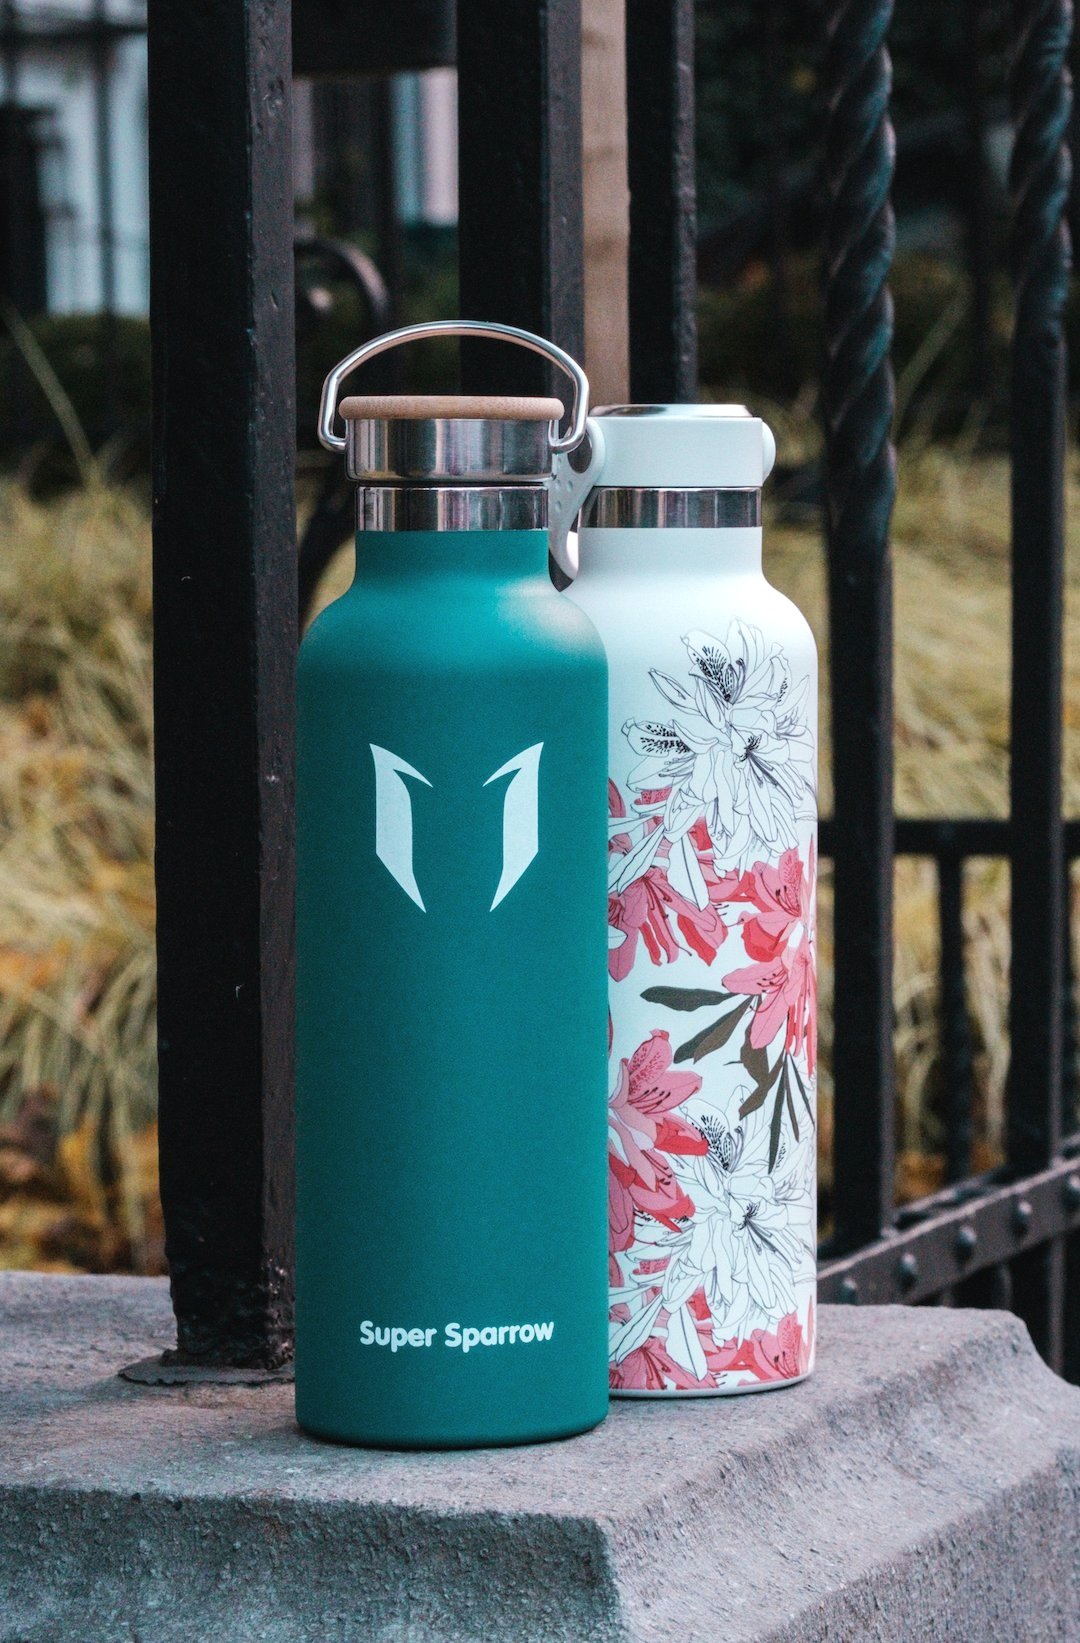 Super Sparrow Steel Water Bottles: Top Quality at Half the Price?!｜Gear  Review — The Wildest Road